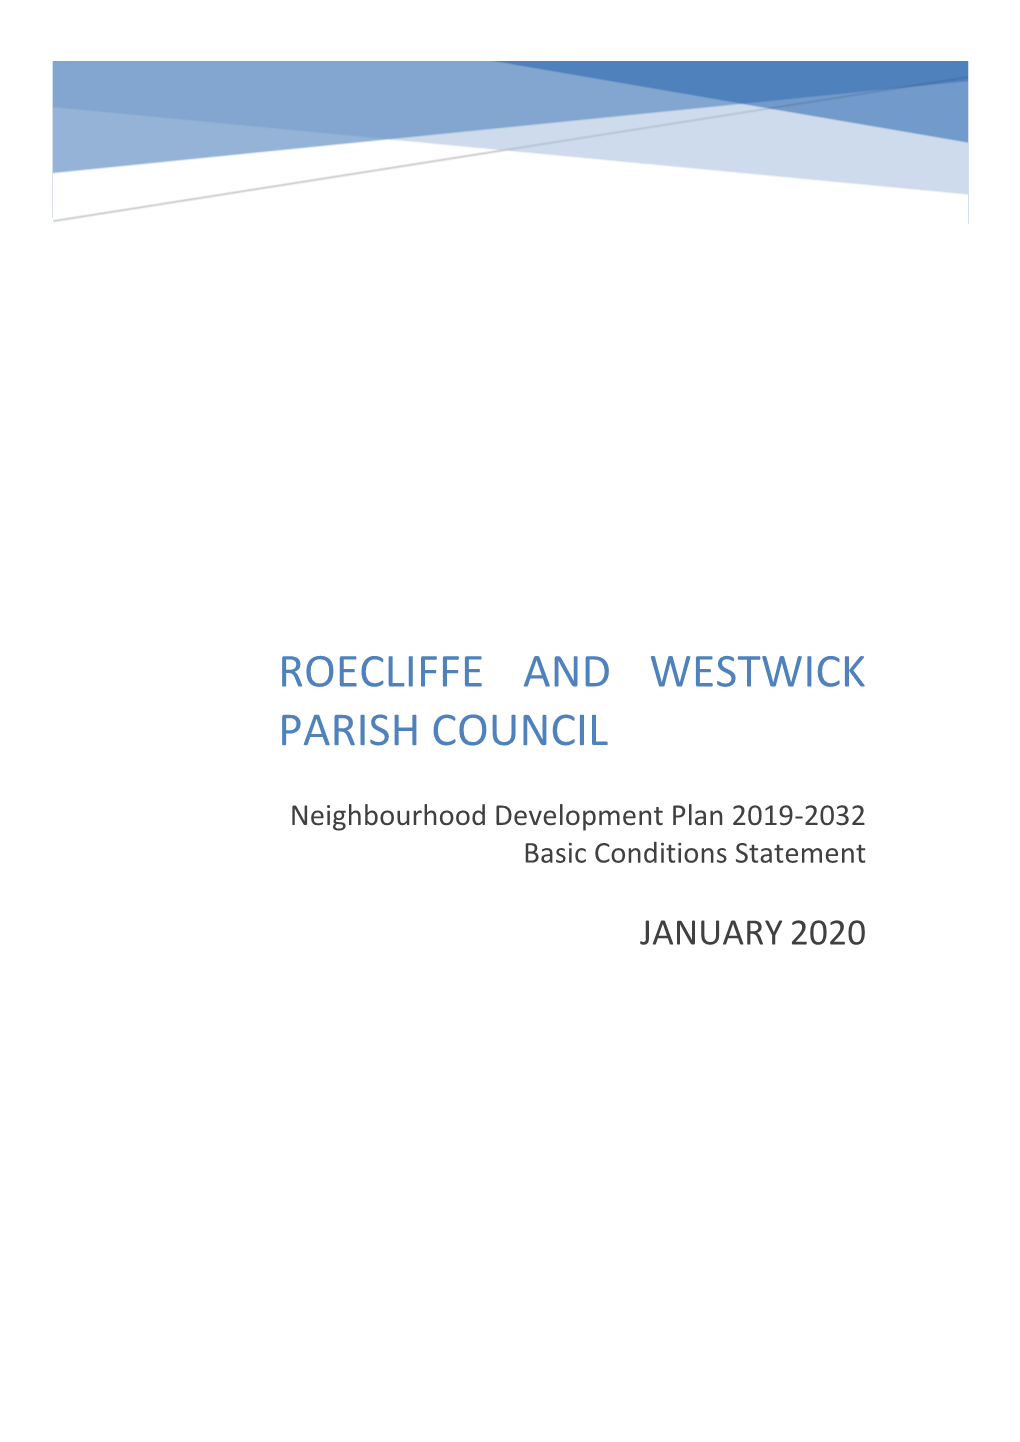 Roecliffe and Westwick Parish Council